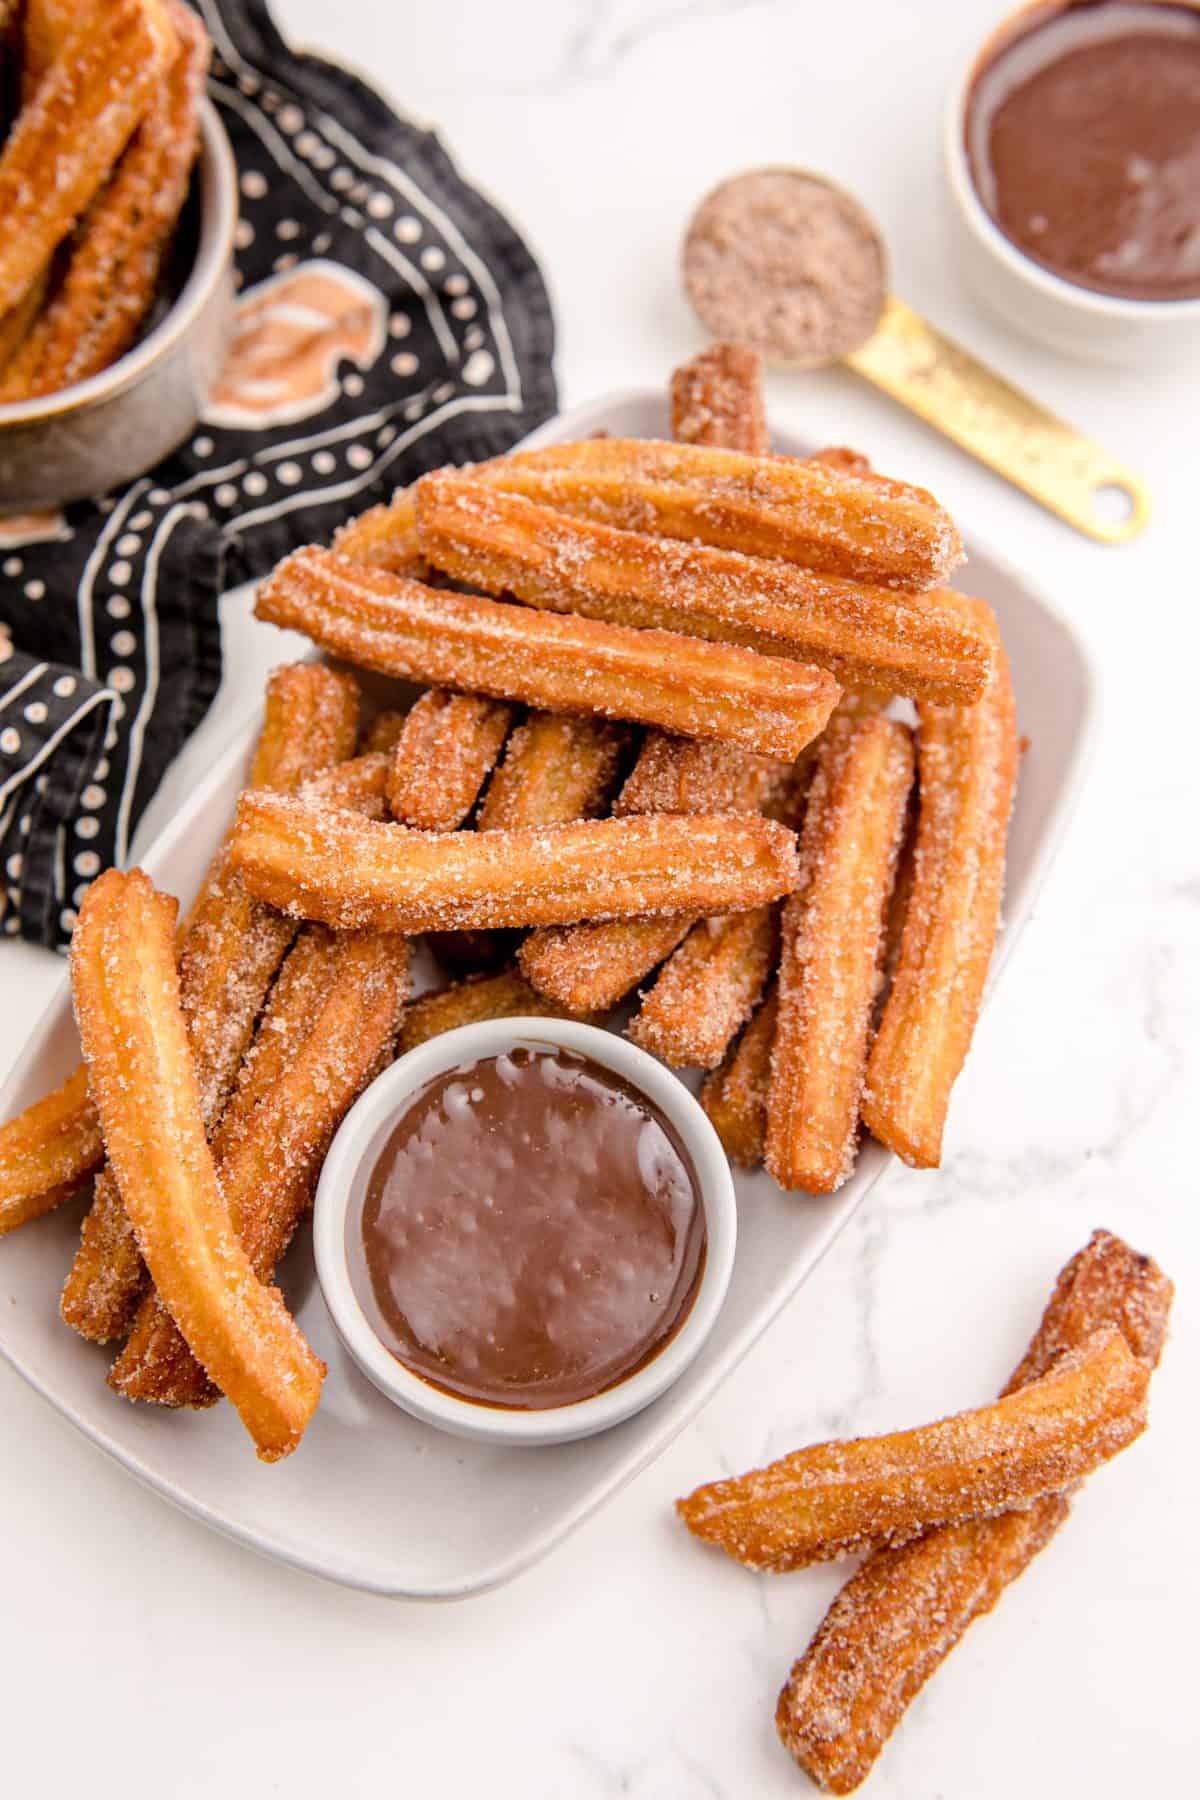 White plate with freshly fried churros and bowl of chocolate sauce.